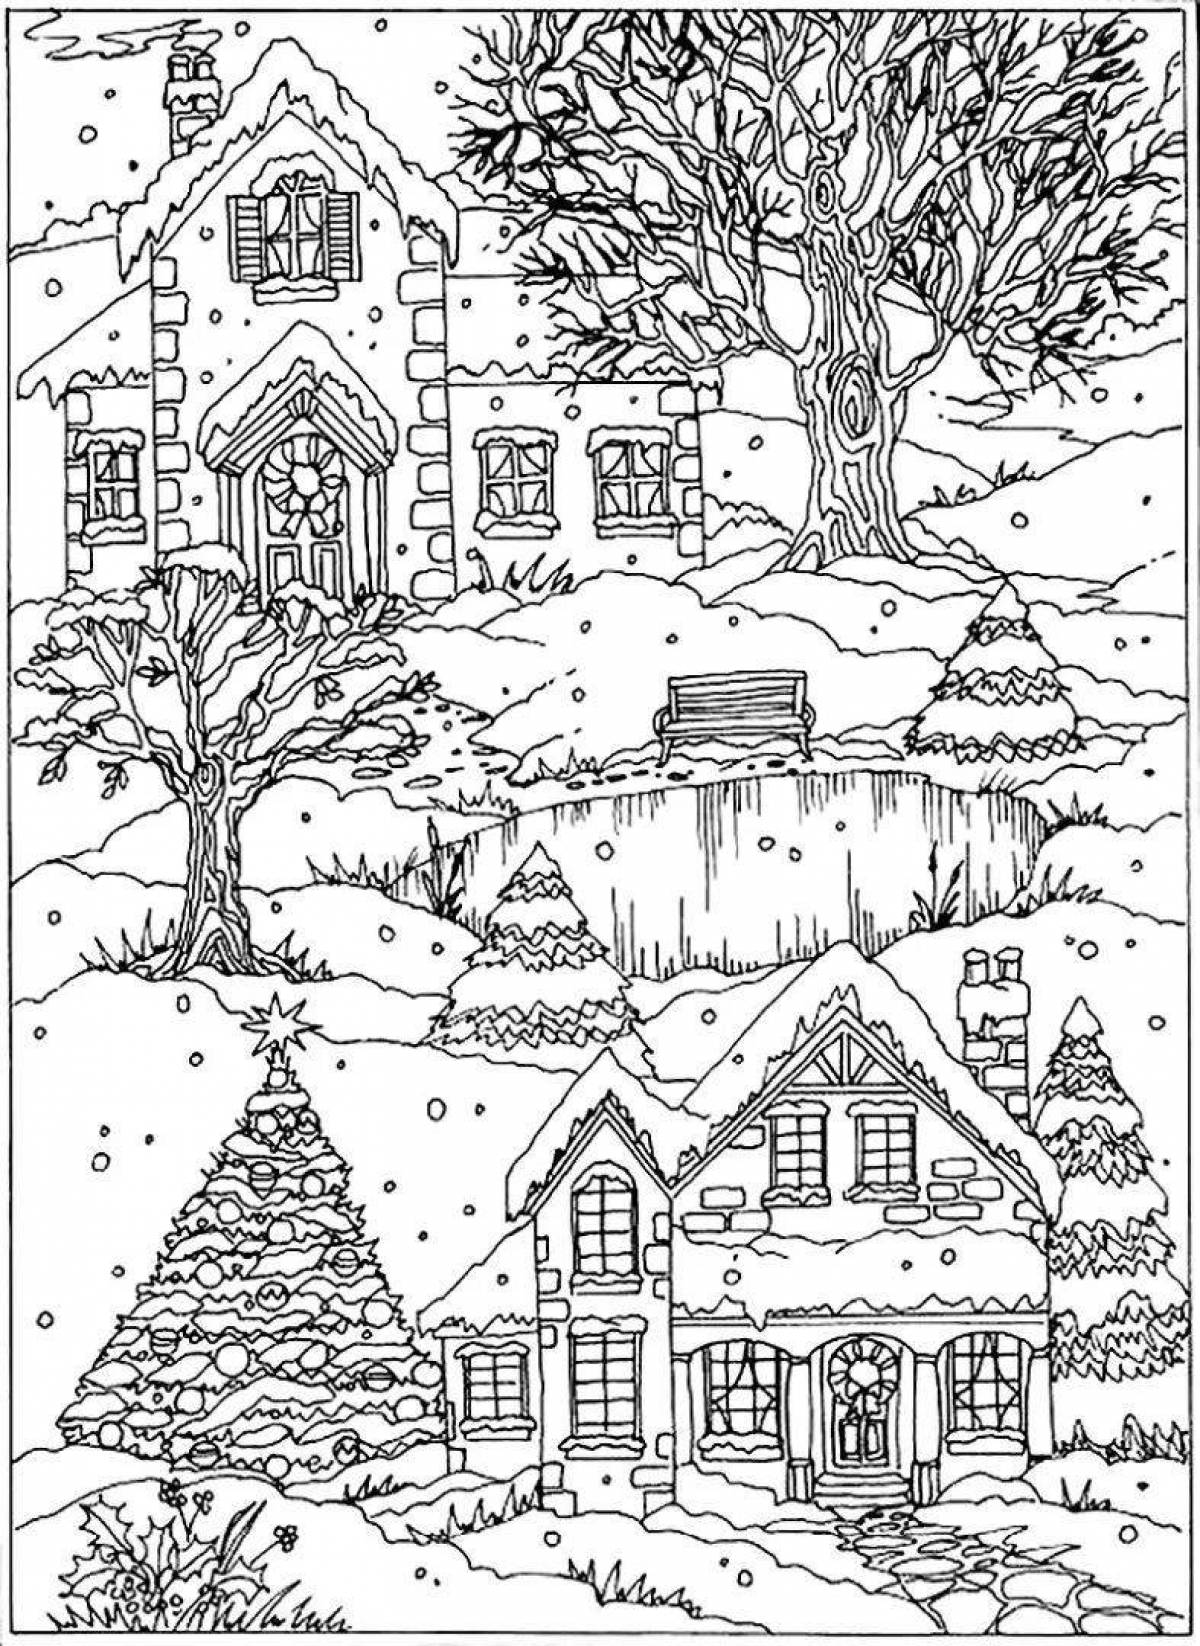 Charming village in winter coloring book